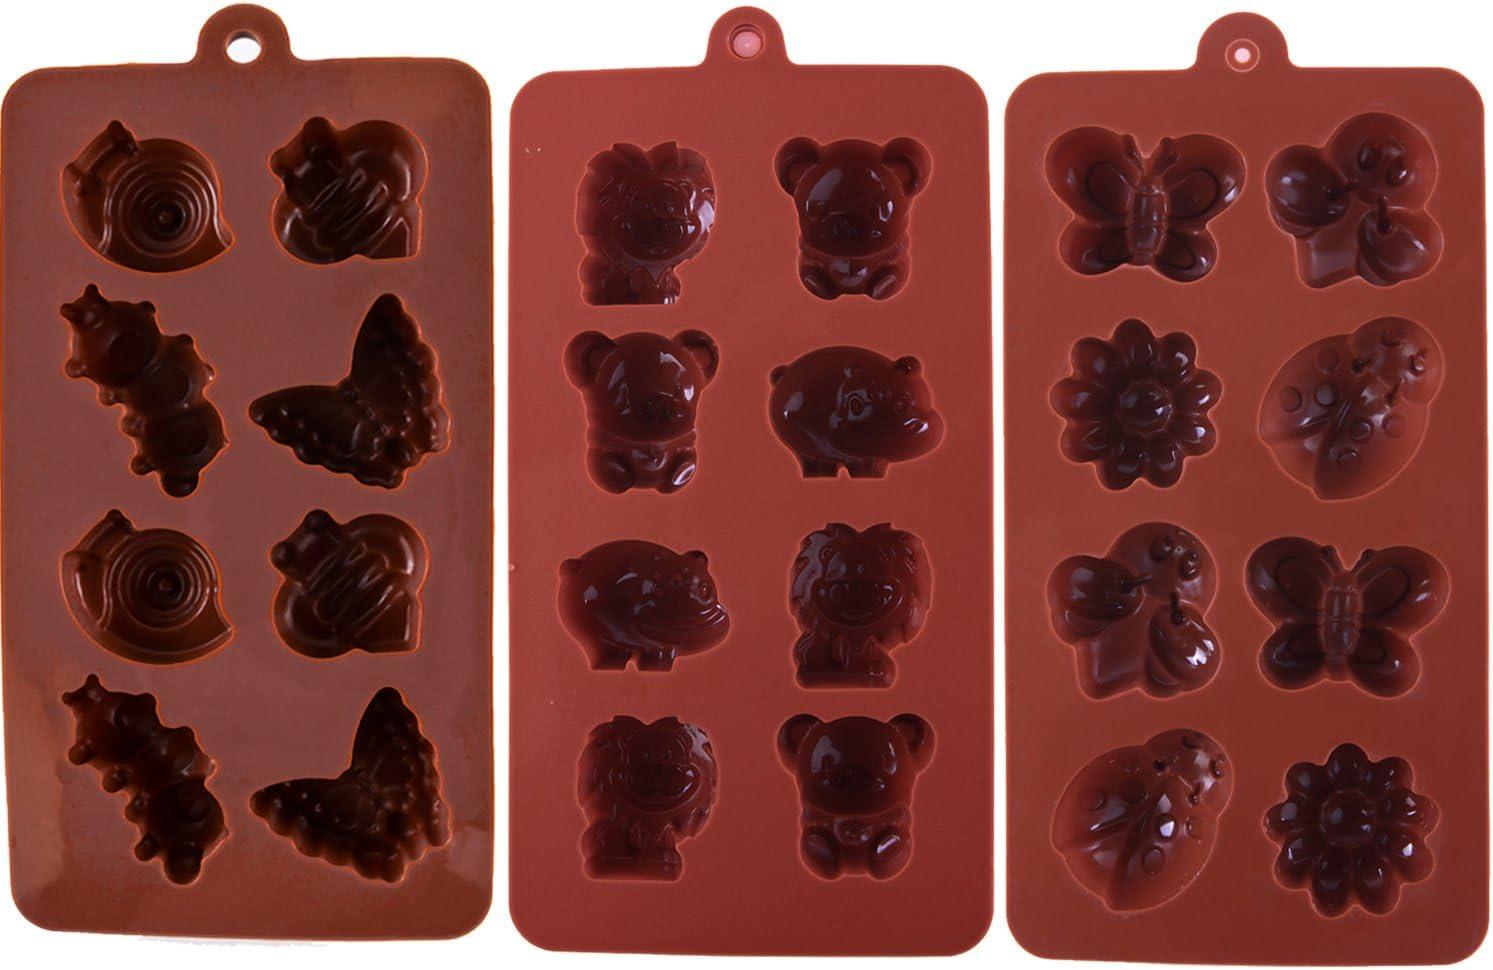 Chocolate Candy Shape Silicone  Mold Silicone Candy Chocolate